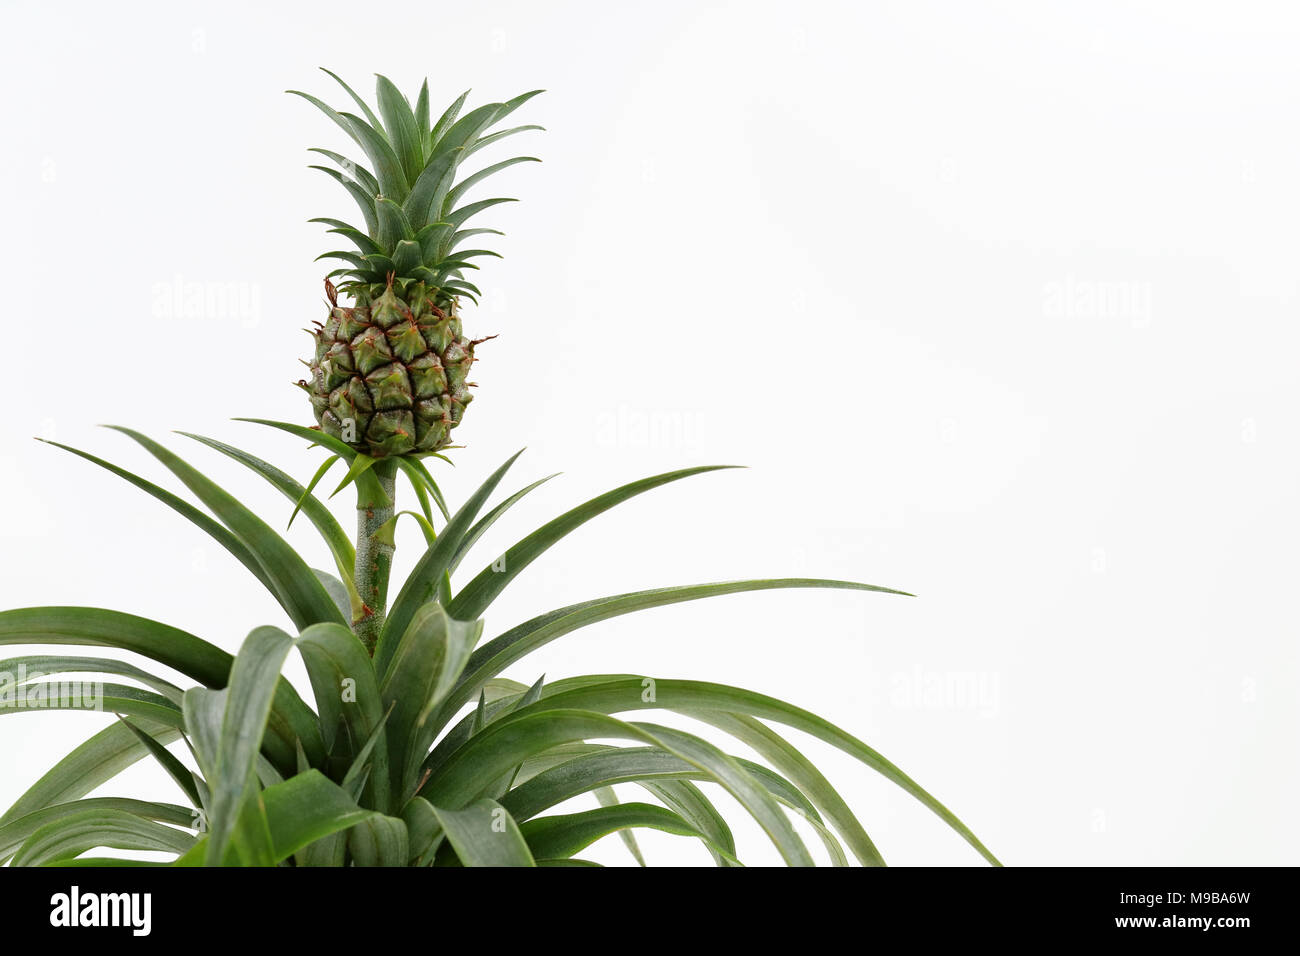 small baby pineapple growing on a plant isolated on white background with copy space Stock Photo